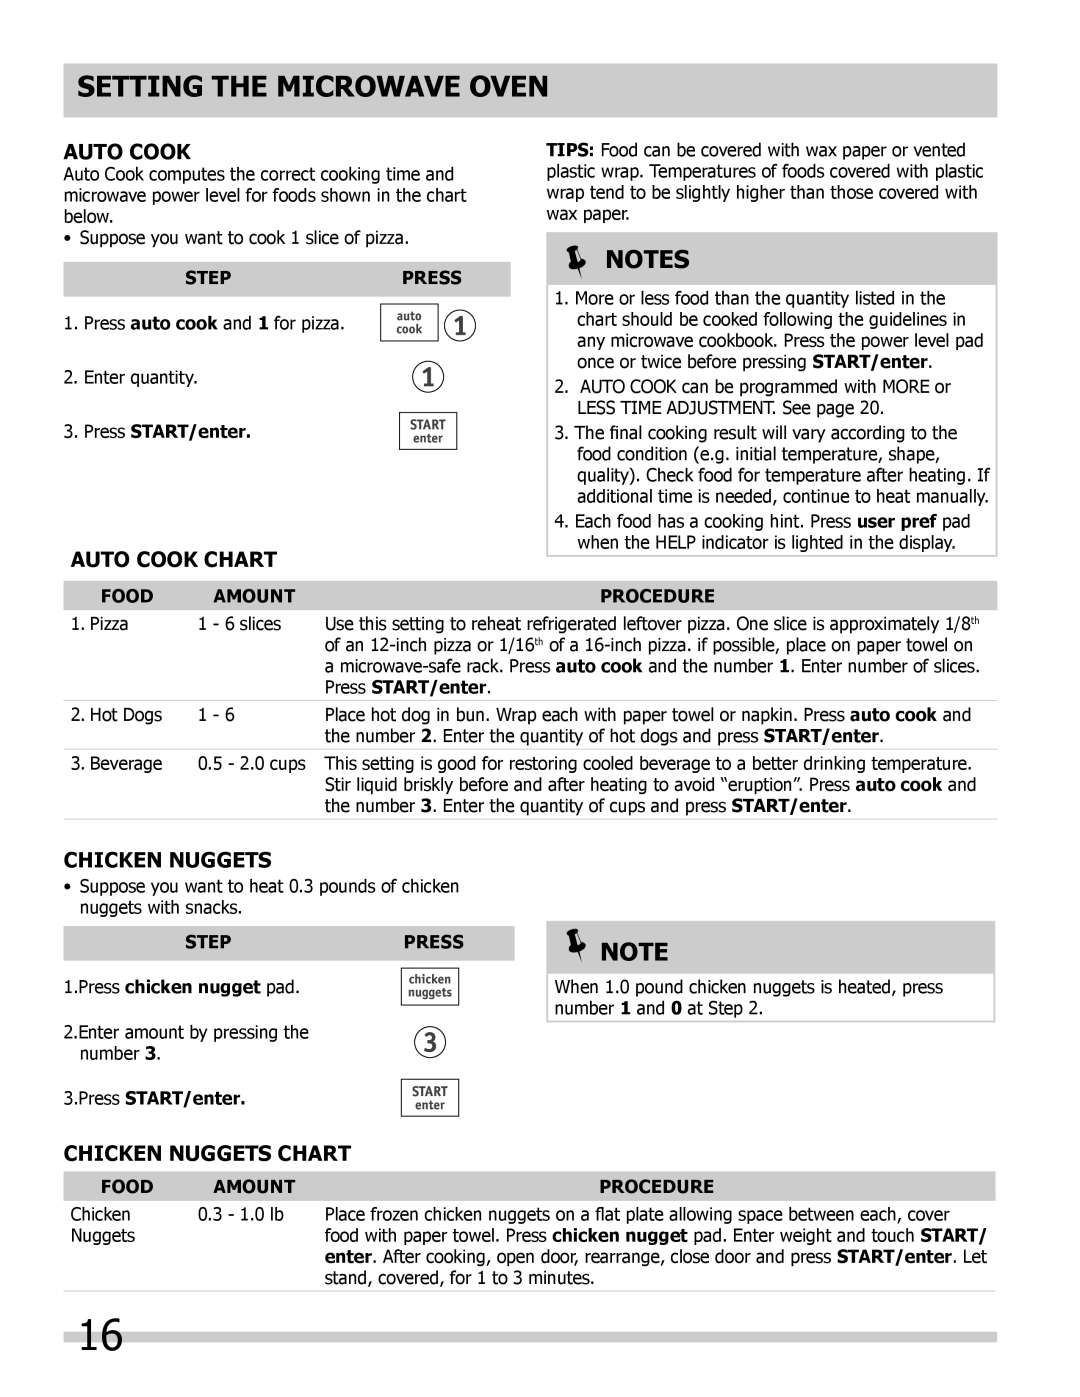 Frigidaire 318205300 Note, Auto Cook Chart, Chicken Nuggets CHART, SETTING THE Microwave oven,  Notes, StepPress 